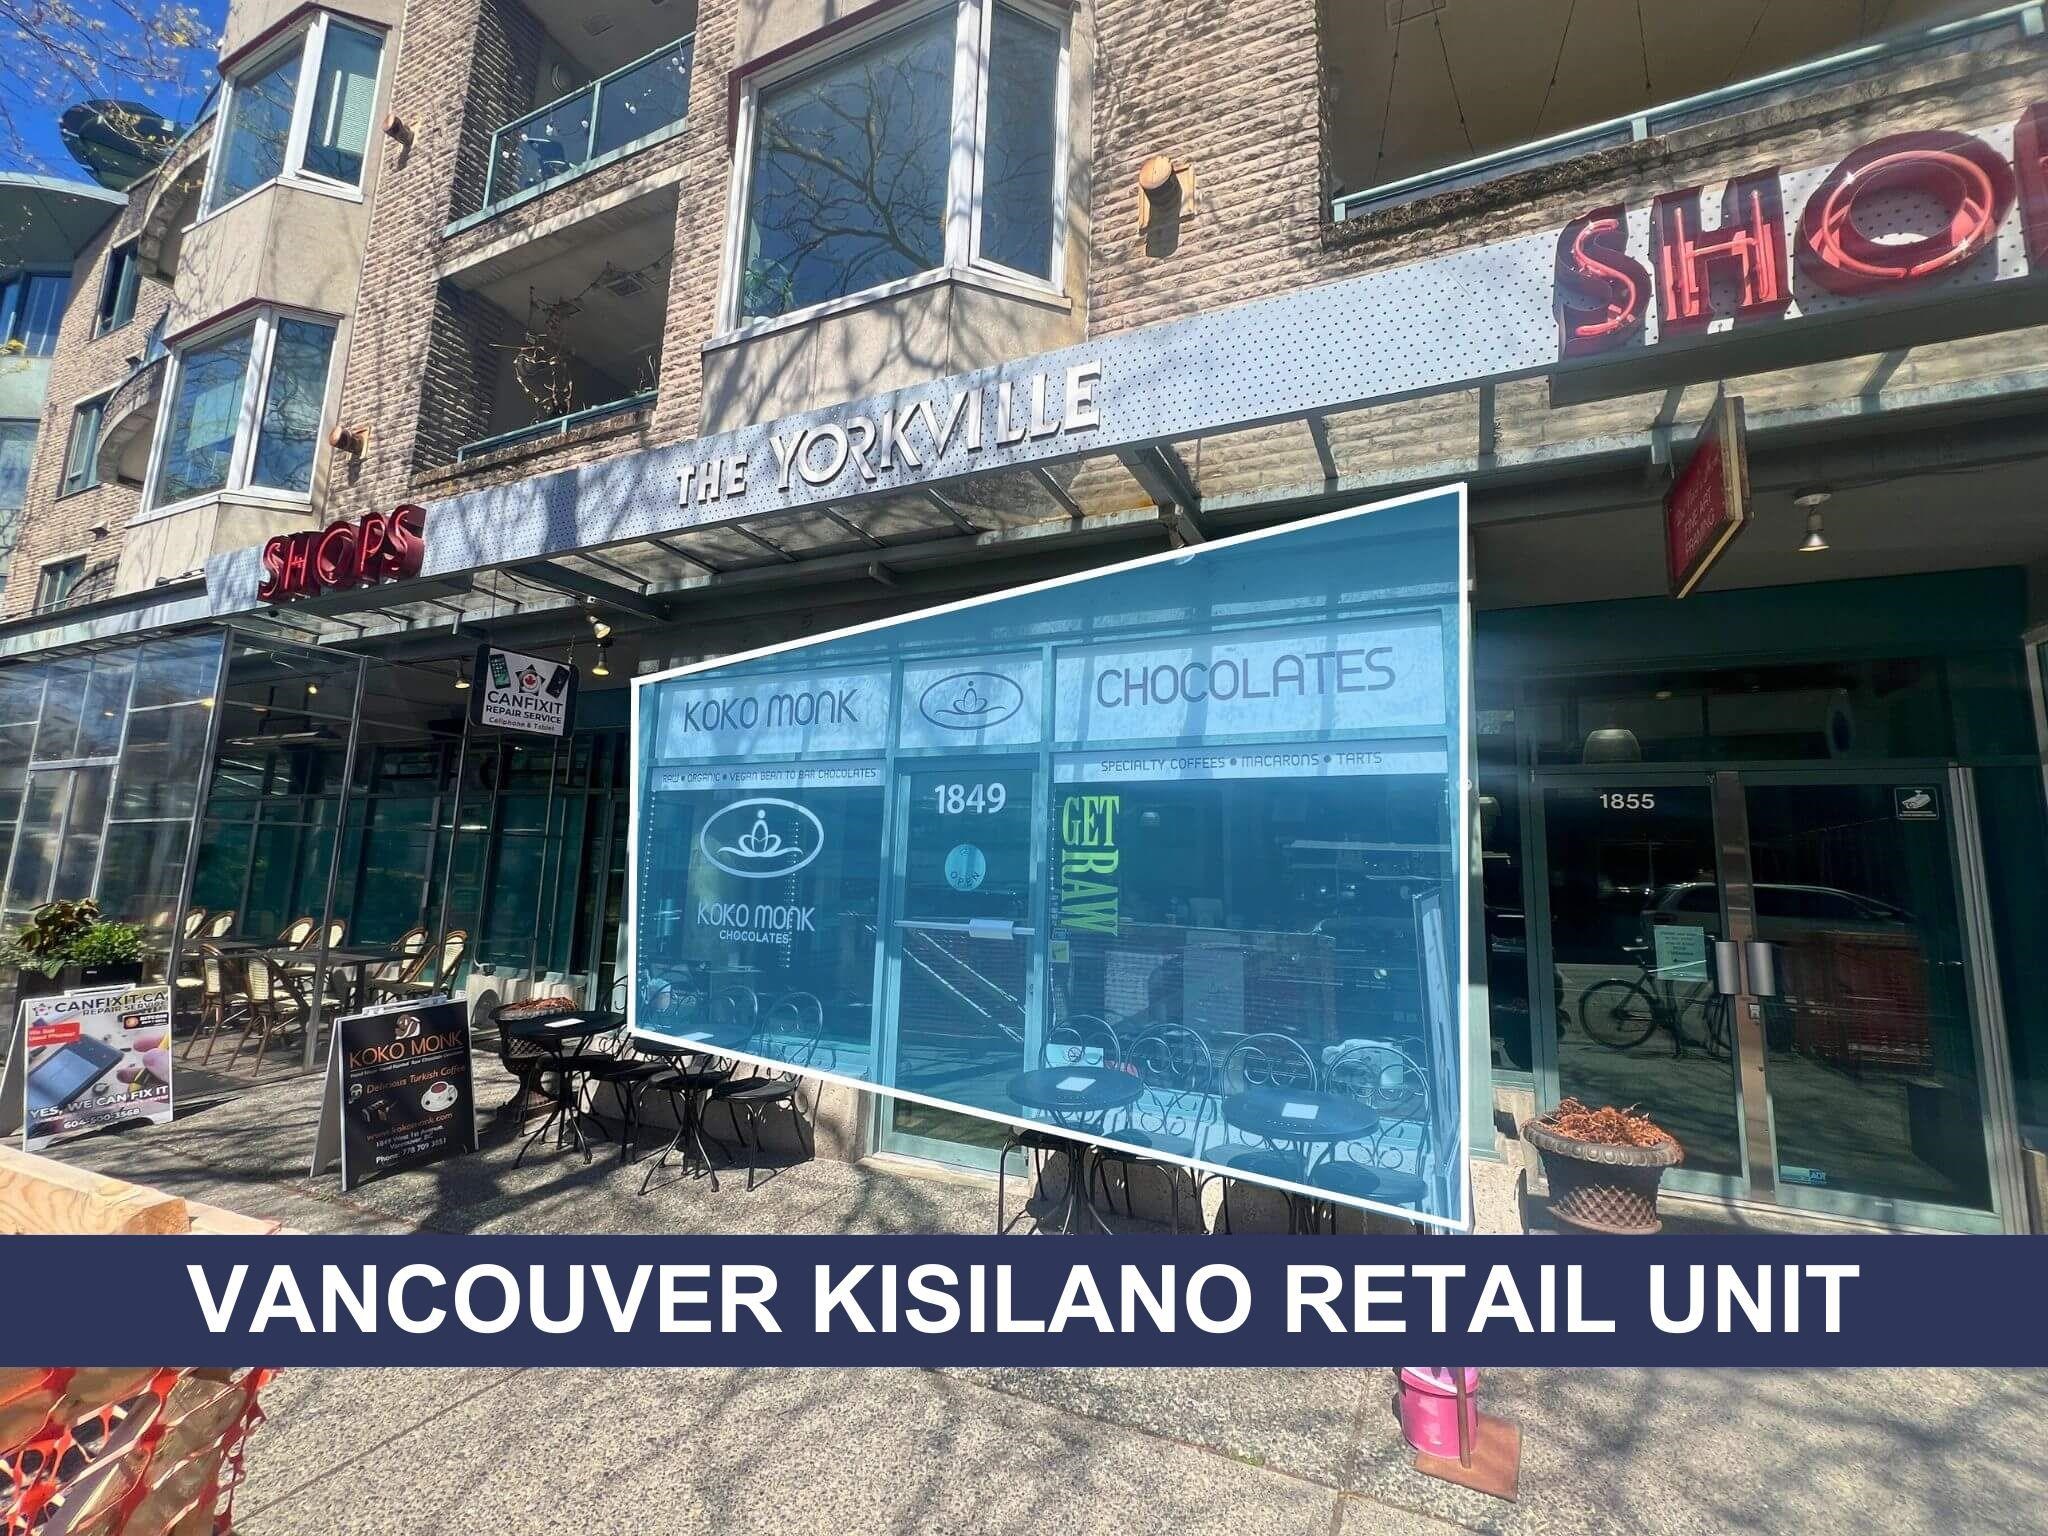 Kitsilano Land Commercial for sale:    (Listed 6800-05-04)